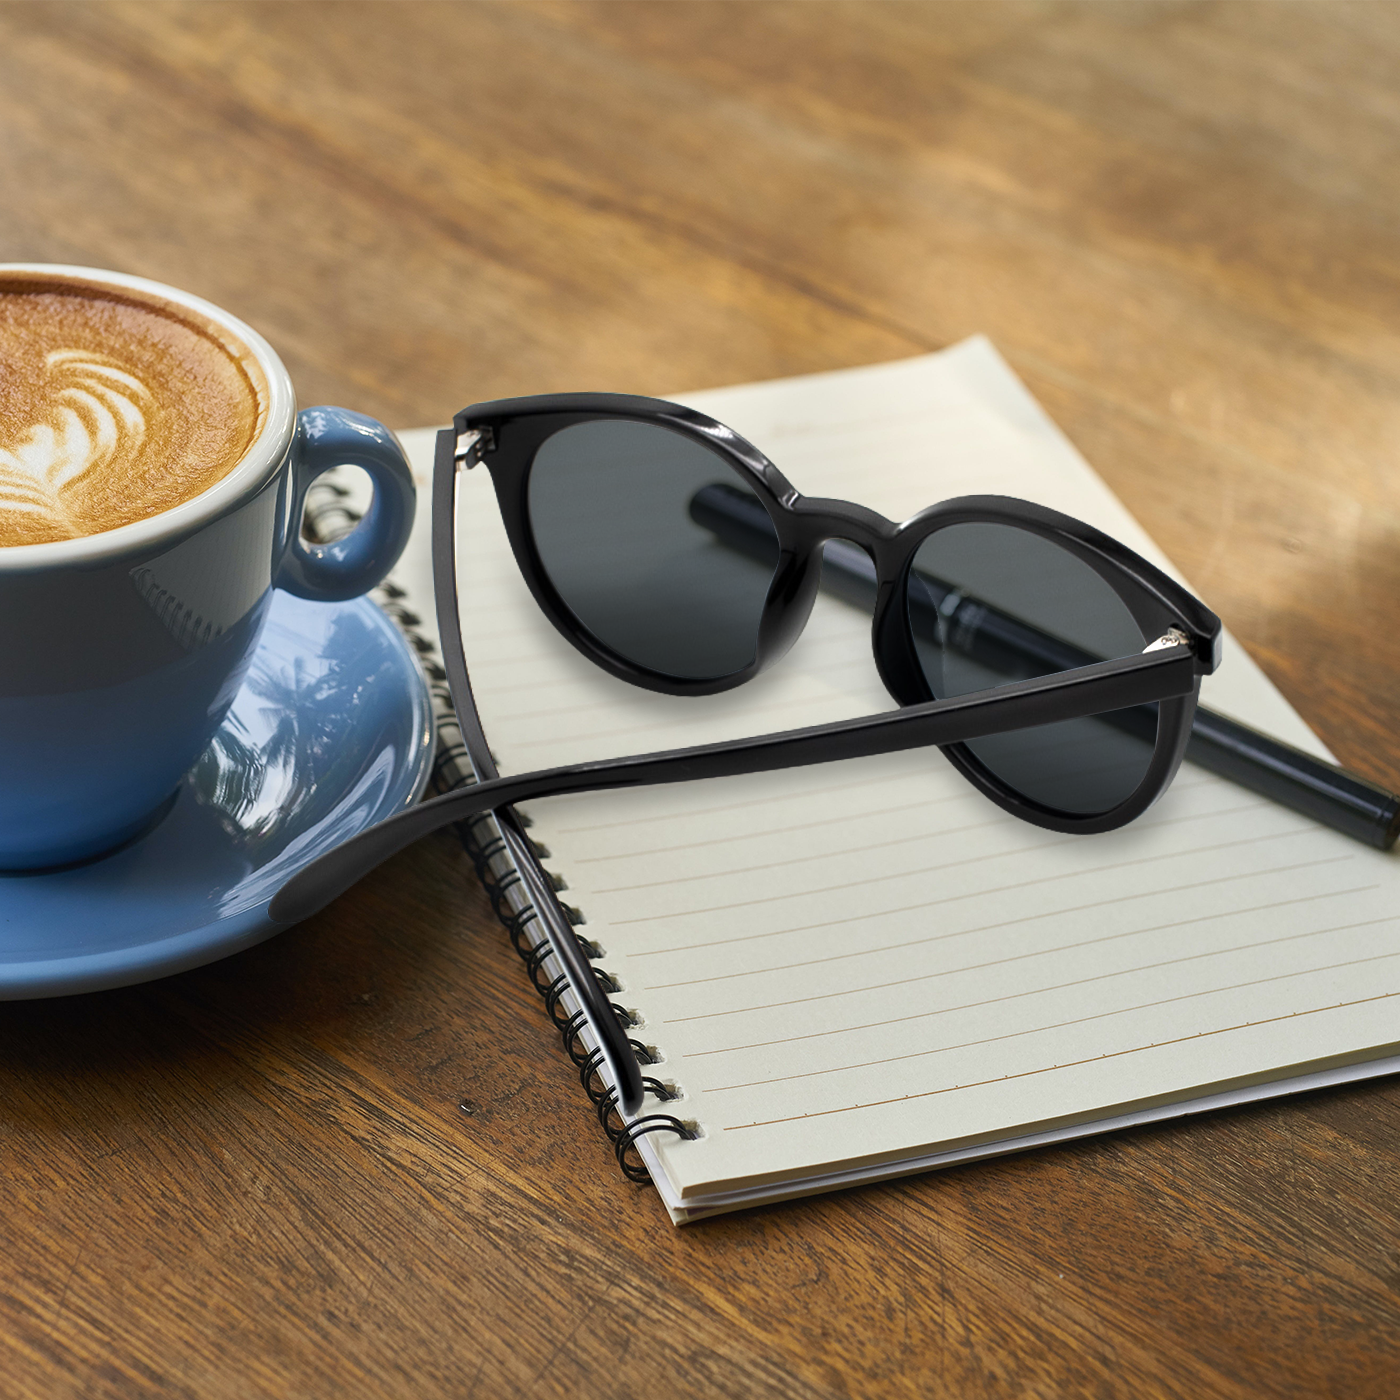 Black sunglasses featuring a gold aquarius zodiac sign engraved on the endpiece - flat lay coffee and table